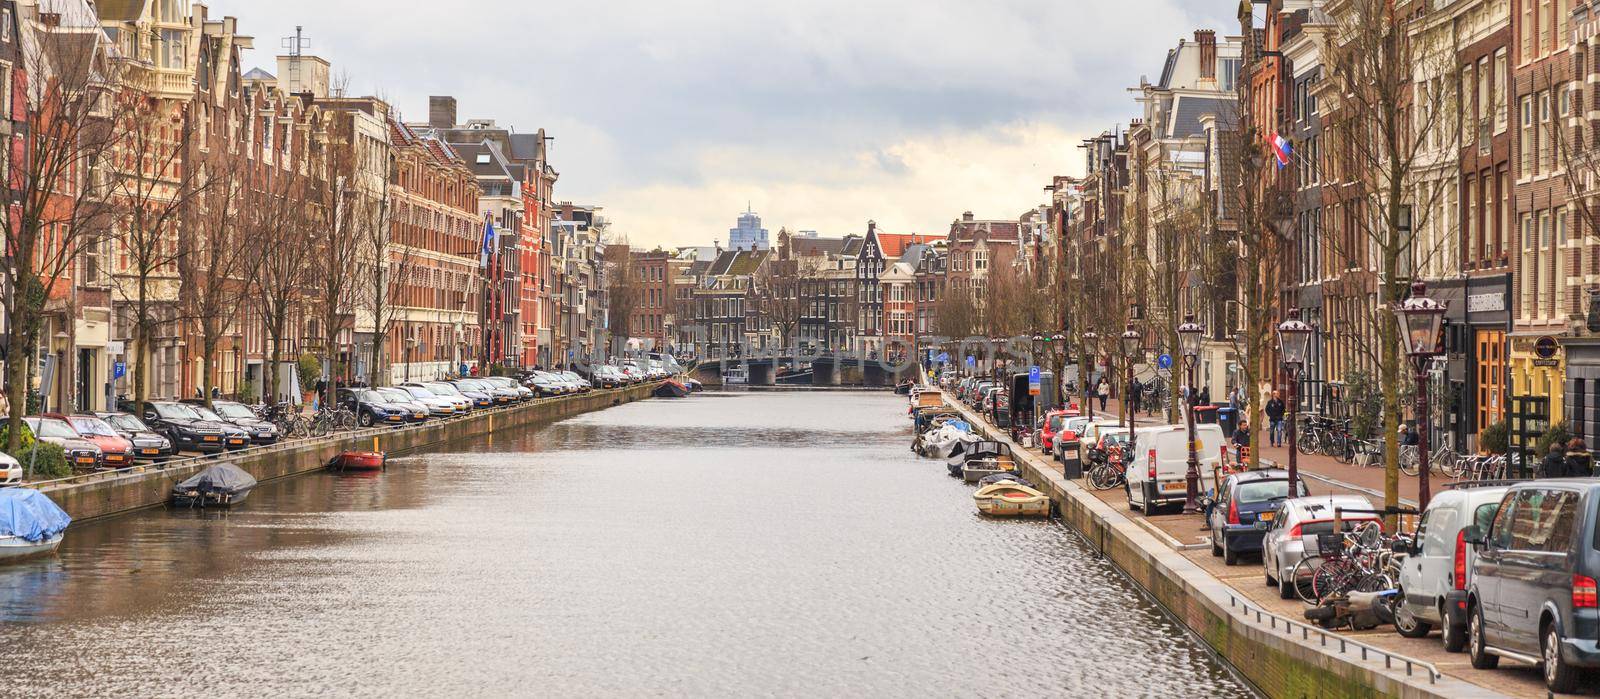 AMSTERDAM, NETHERLANDS - MARCH 15: Streets of the city with canals, on March 15, 2014 in Amsterdam by Mariakray